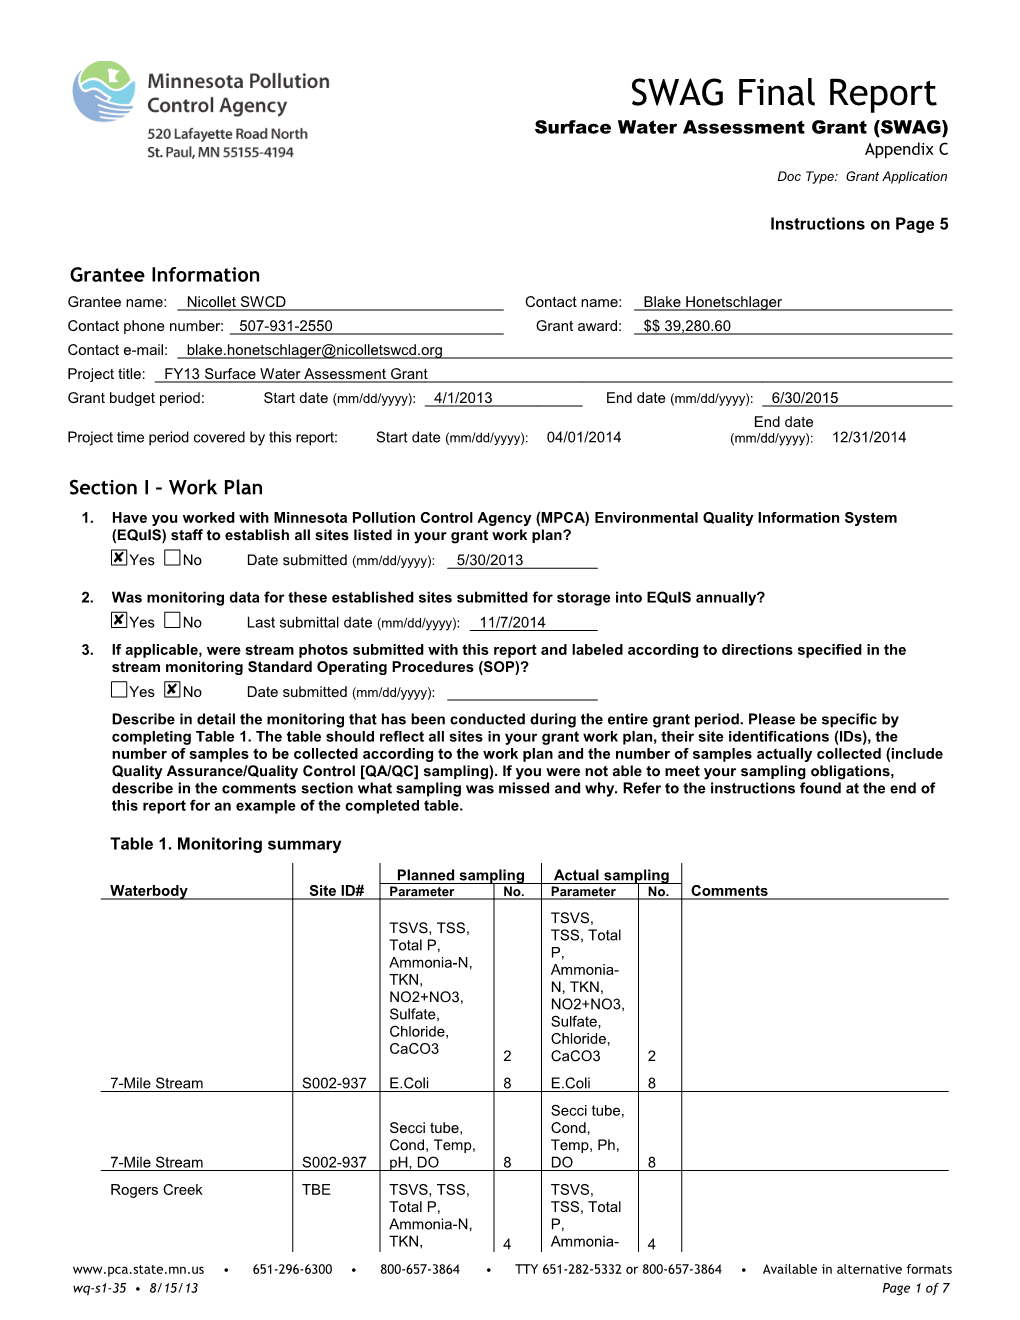 SWAG Final Report -Surface Water Assessment Grant (SWAG)- Appendix C - Form